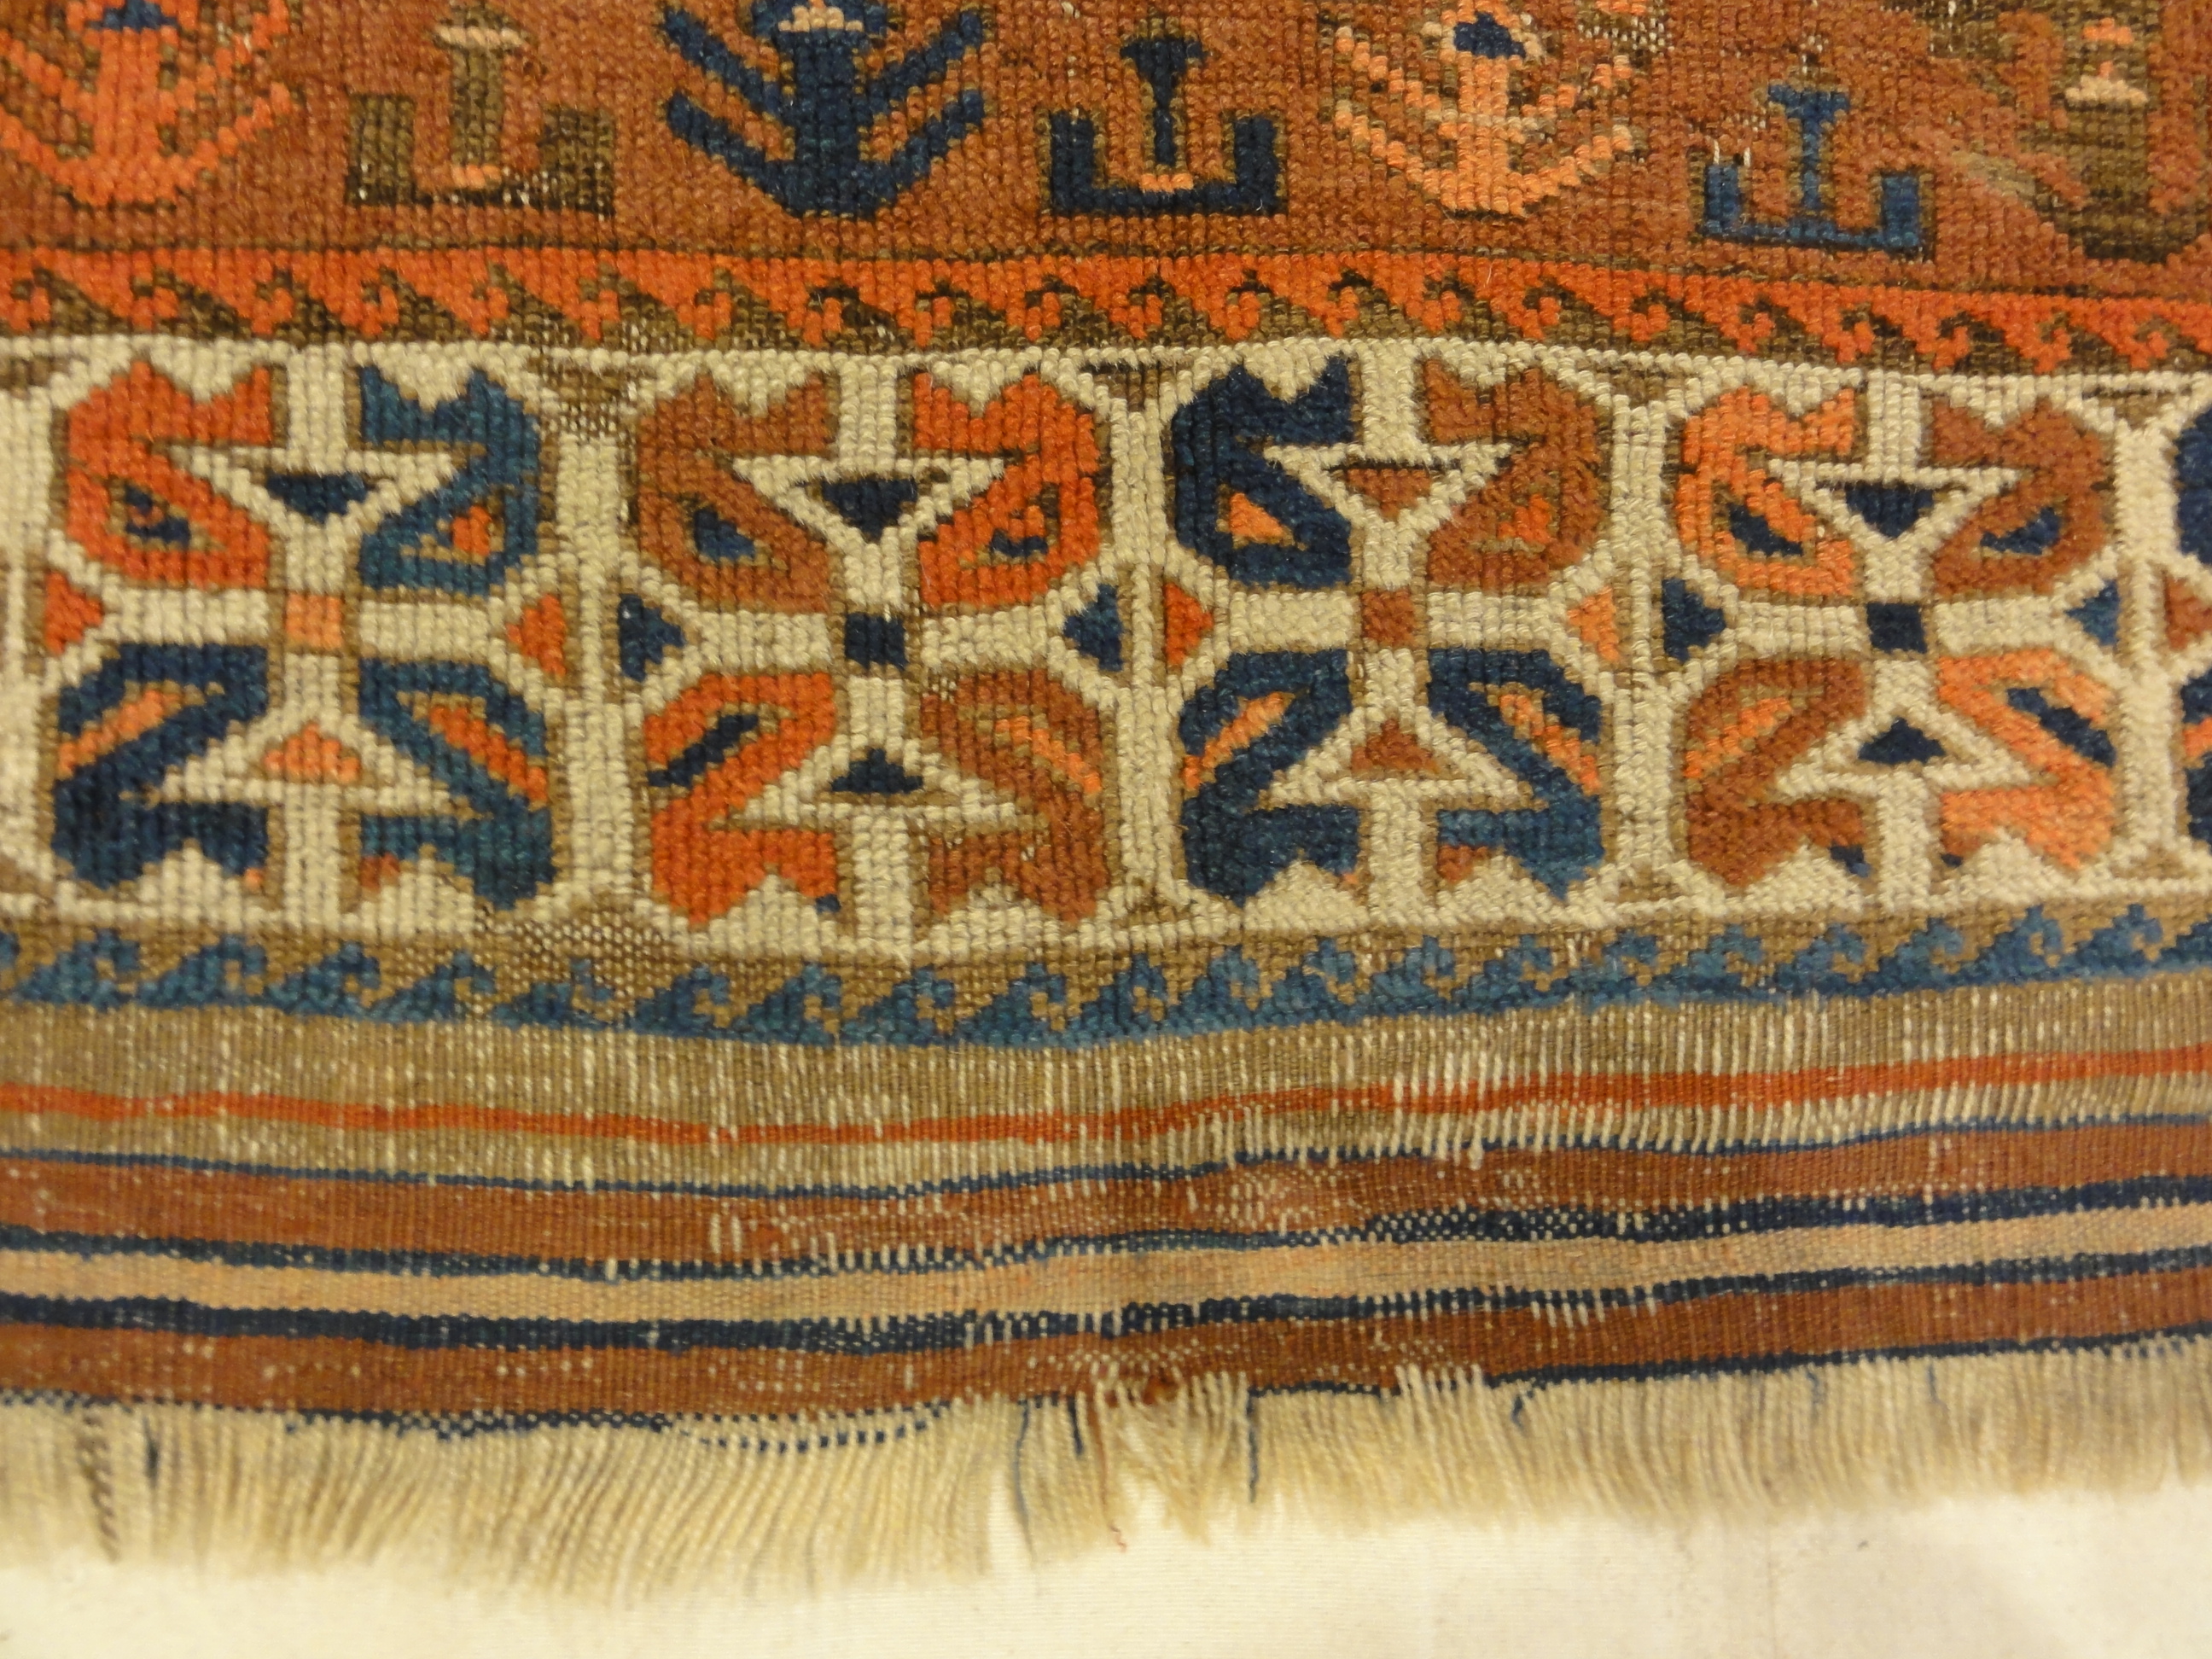 Unique Colorful Circa 1890s Beluch. A piece of genuine authentic woven carpet art sold by Santa Barbara Design Center Rugs and More.